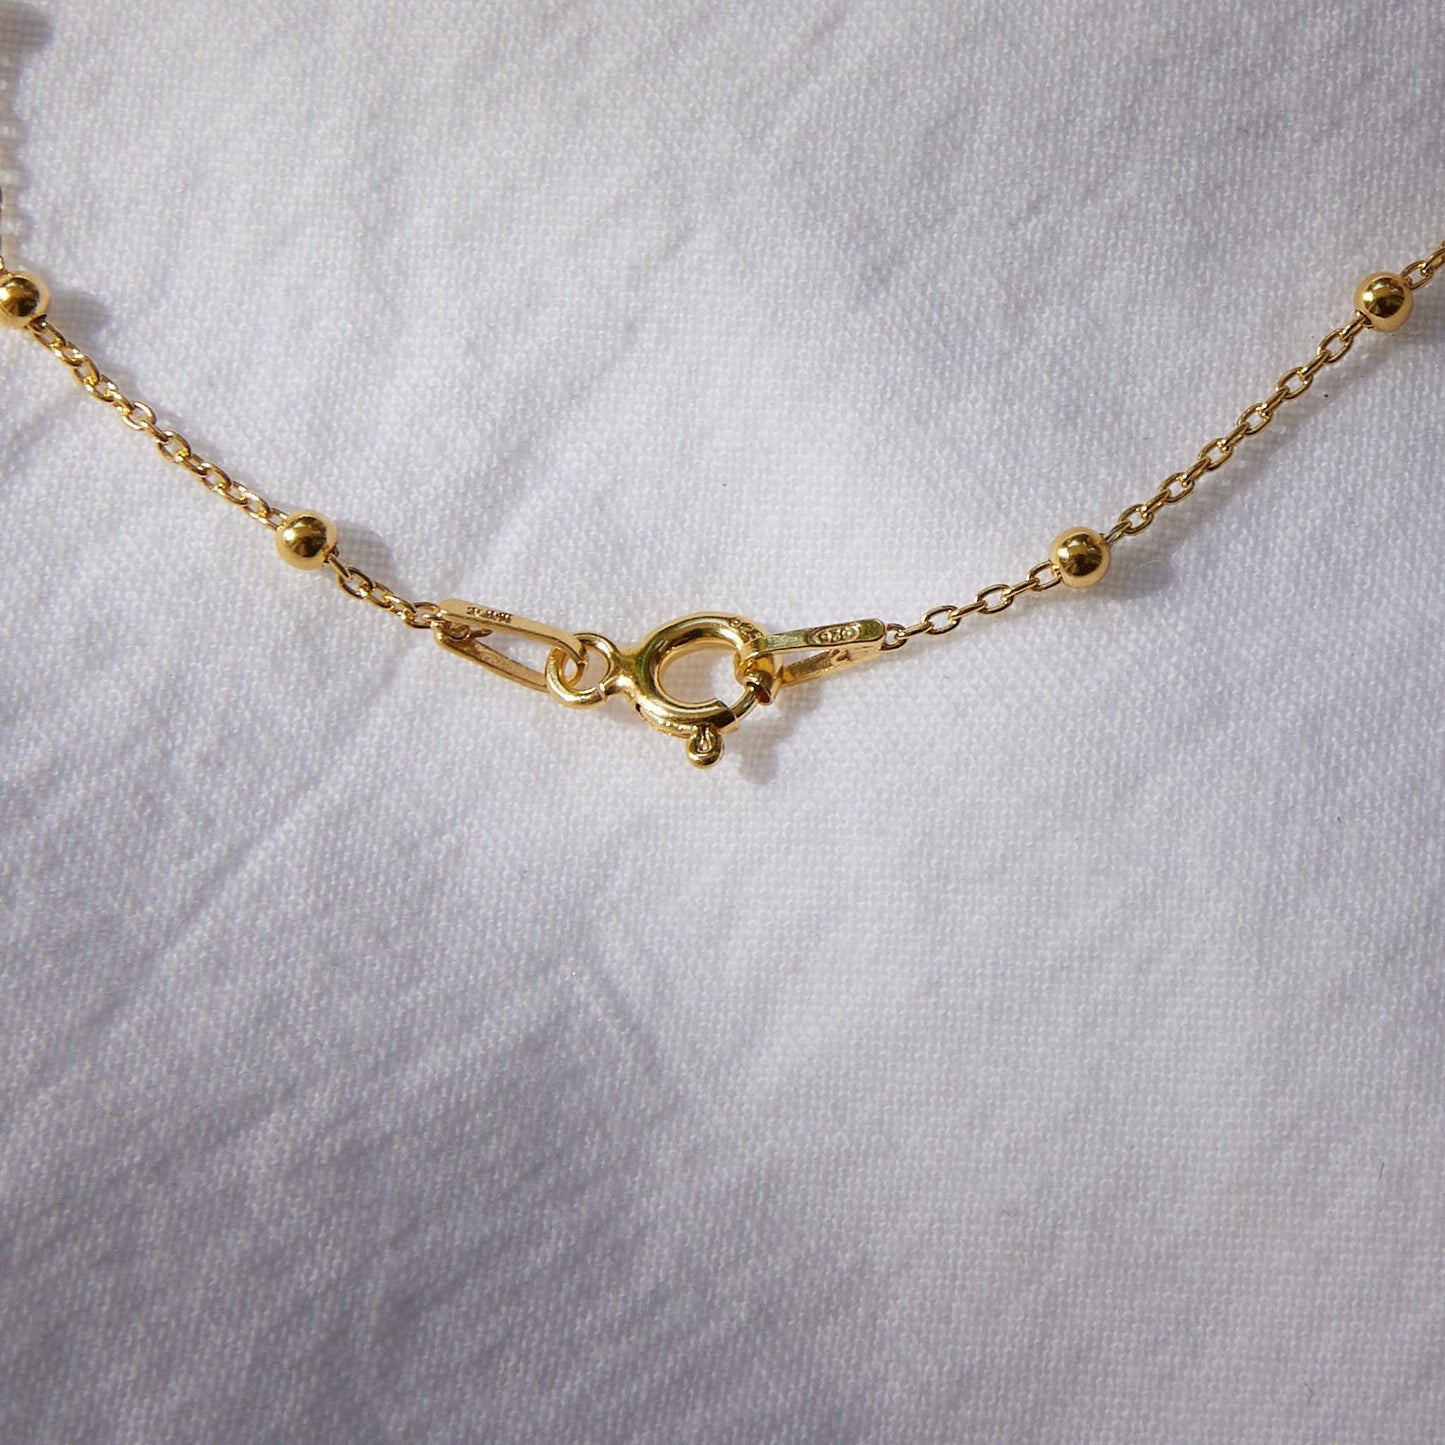 Compass on 24k Gold Plated ball chain